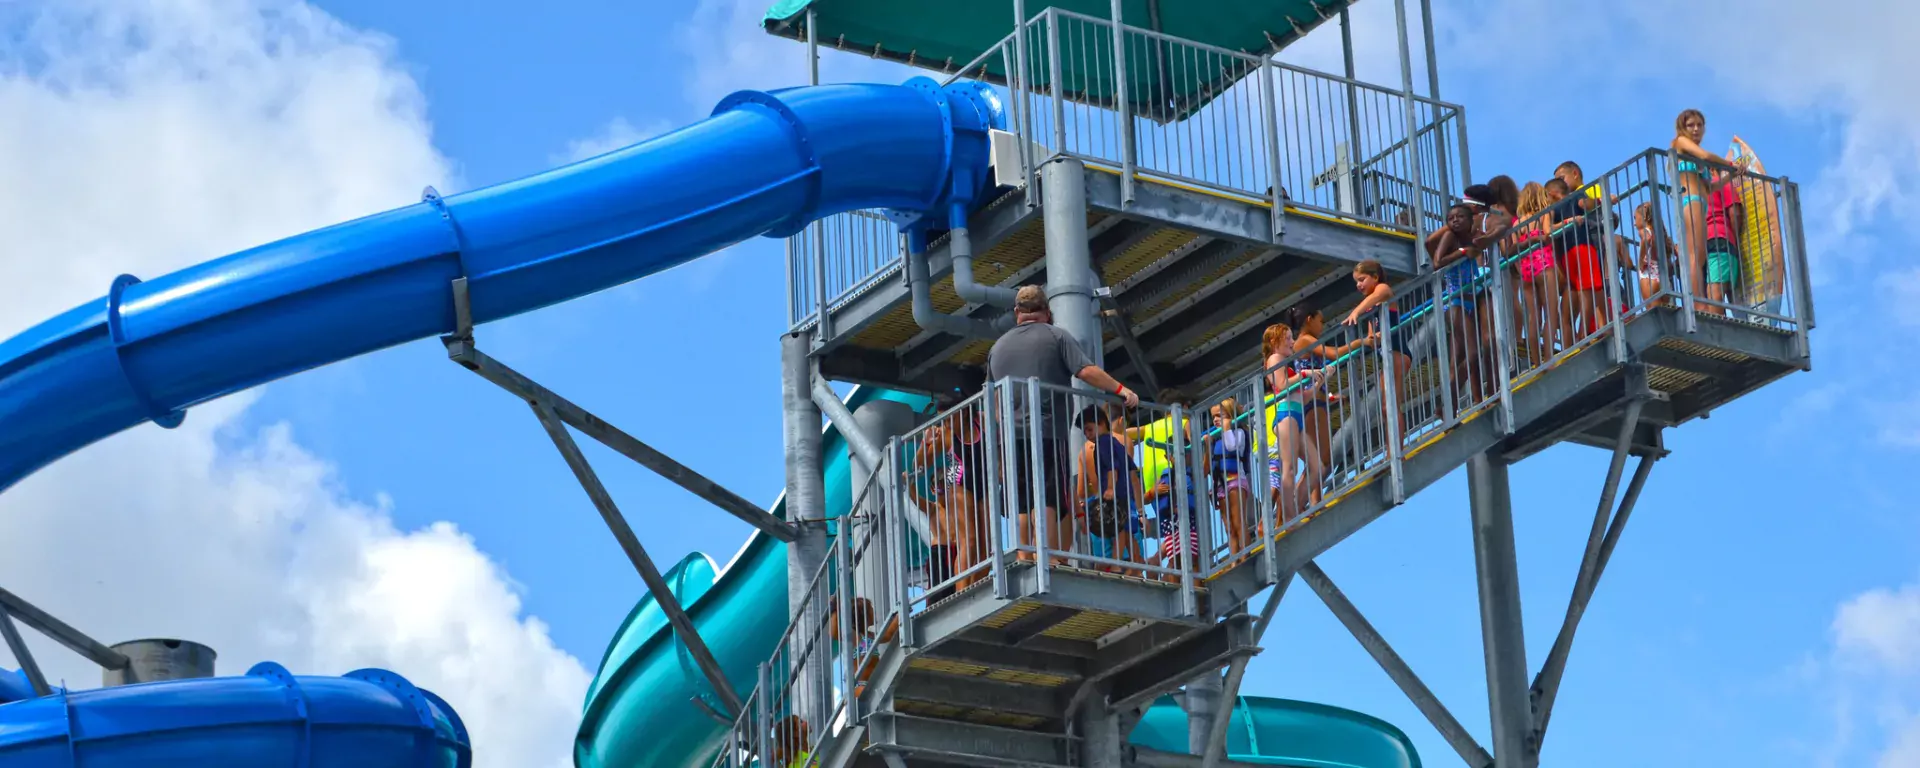 Image of Two four-story tall water slides including  a 253 foot closed flume “Speed Slide" at Sailfish Splash Waterpark in Stuart, FL. 